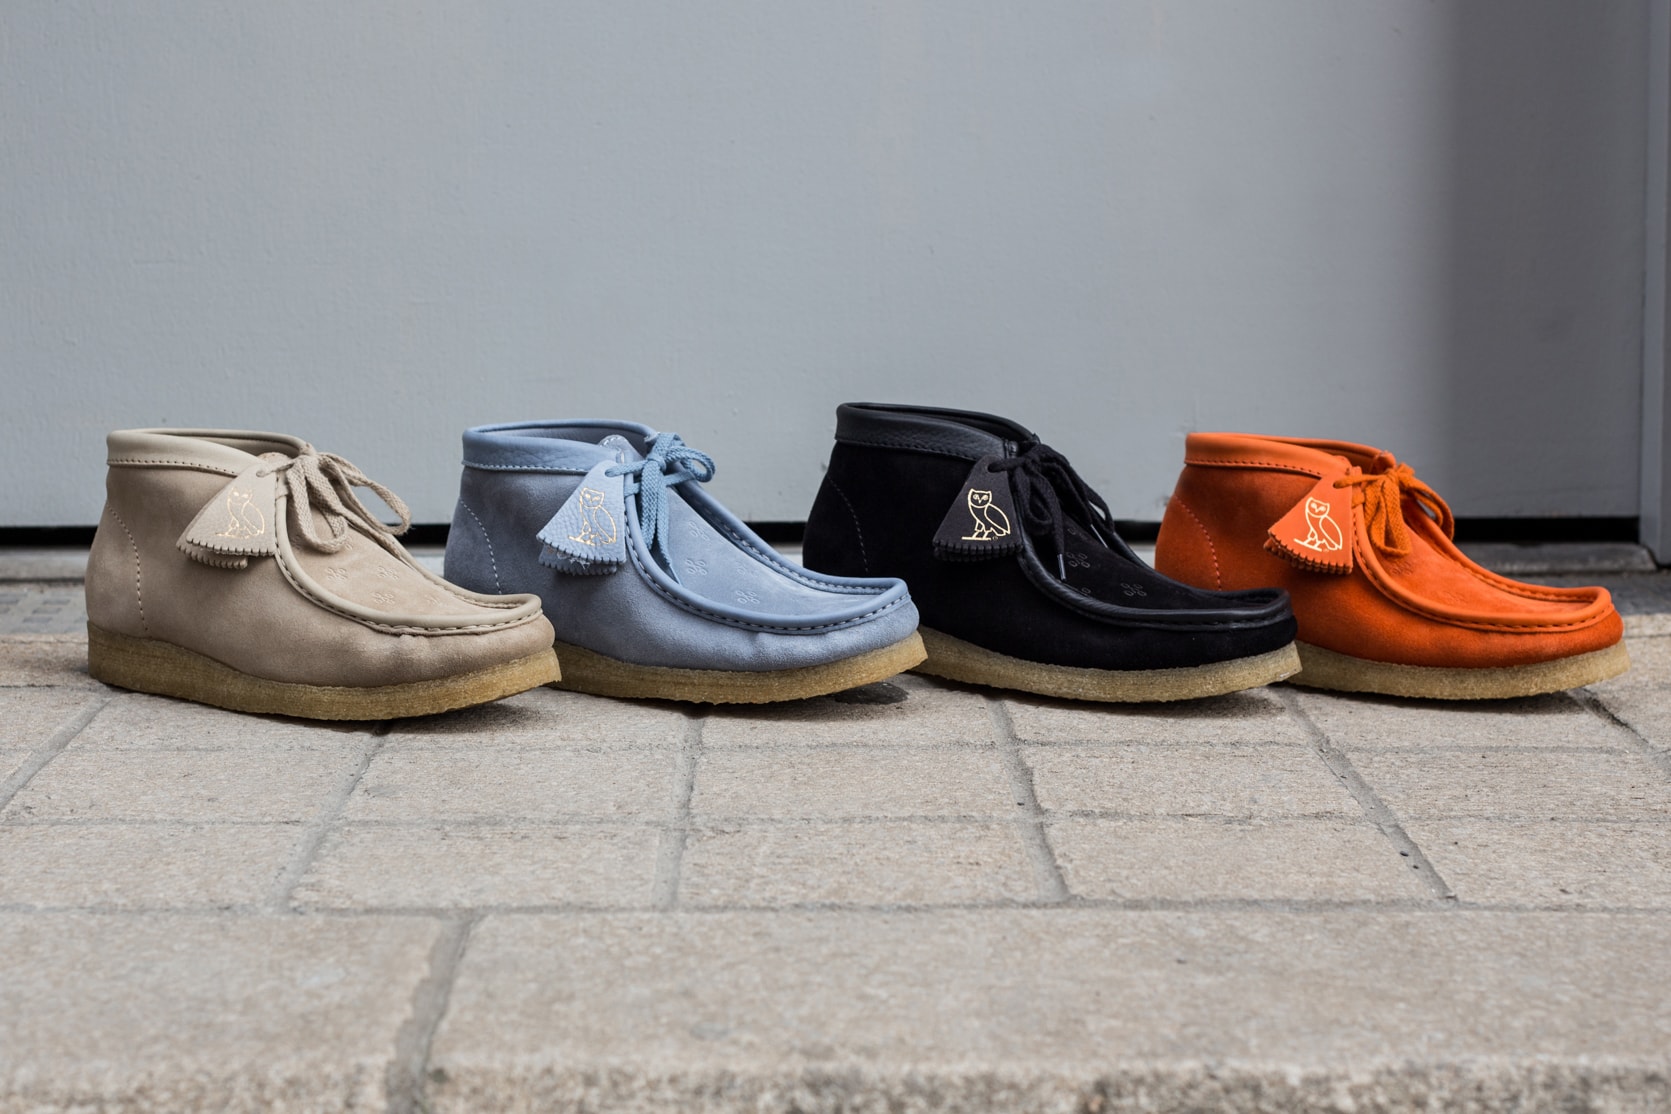 Drake OVO Clarks Wallabee Closer Look Collaboration For Sale Availability Pricing Release Info Desert Boots Date Hat Sweatshirt